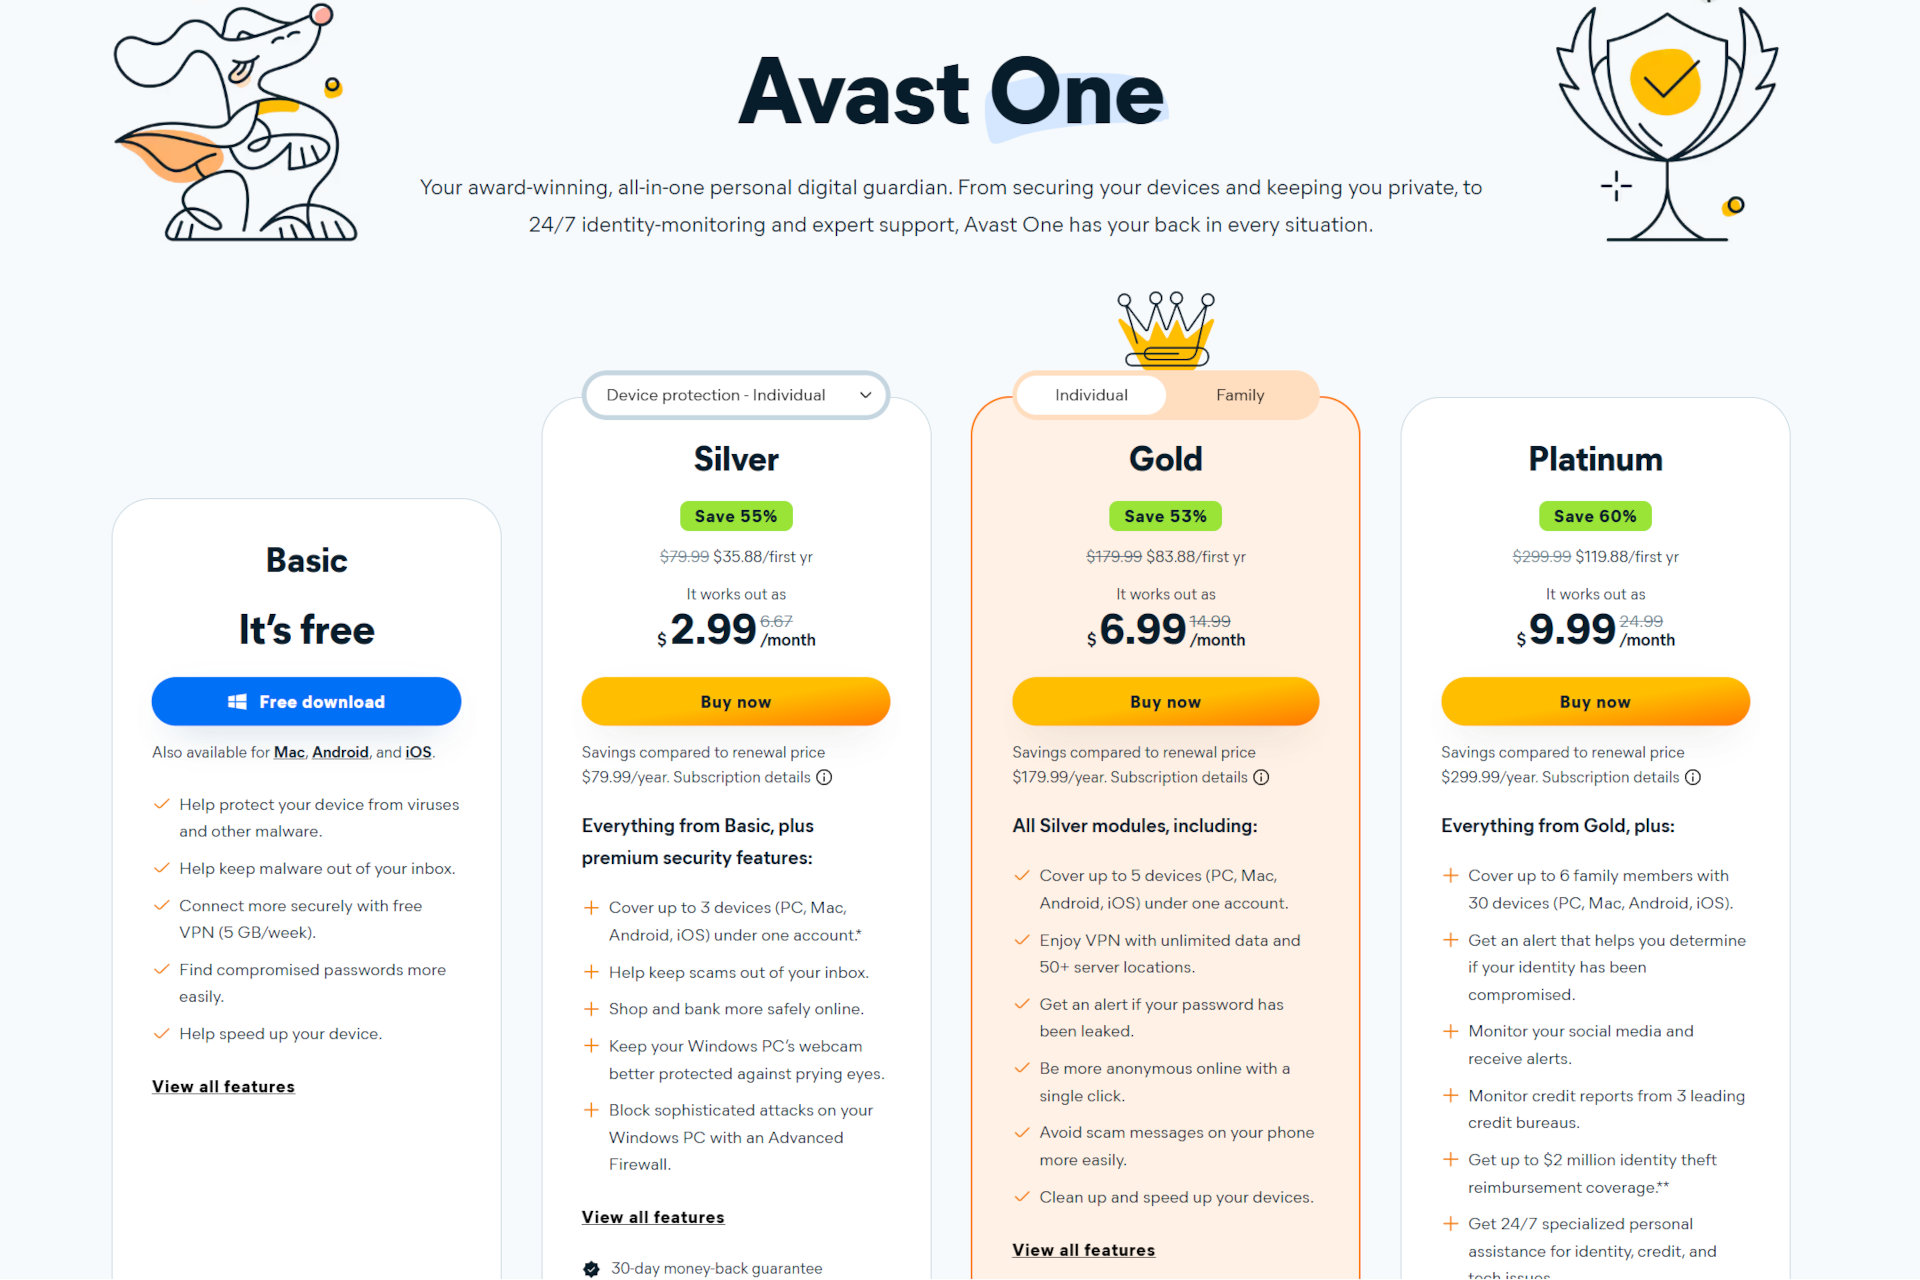 Avast One has a free plan and several paid subscription options.